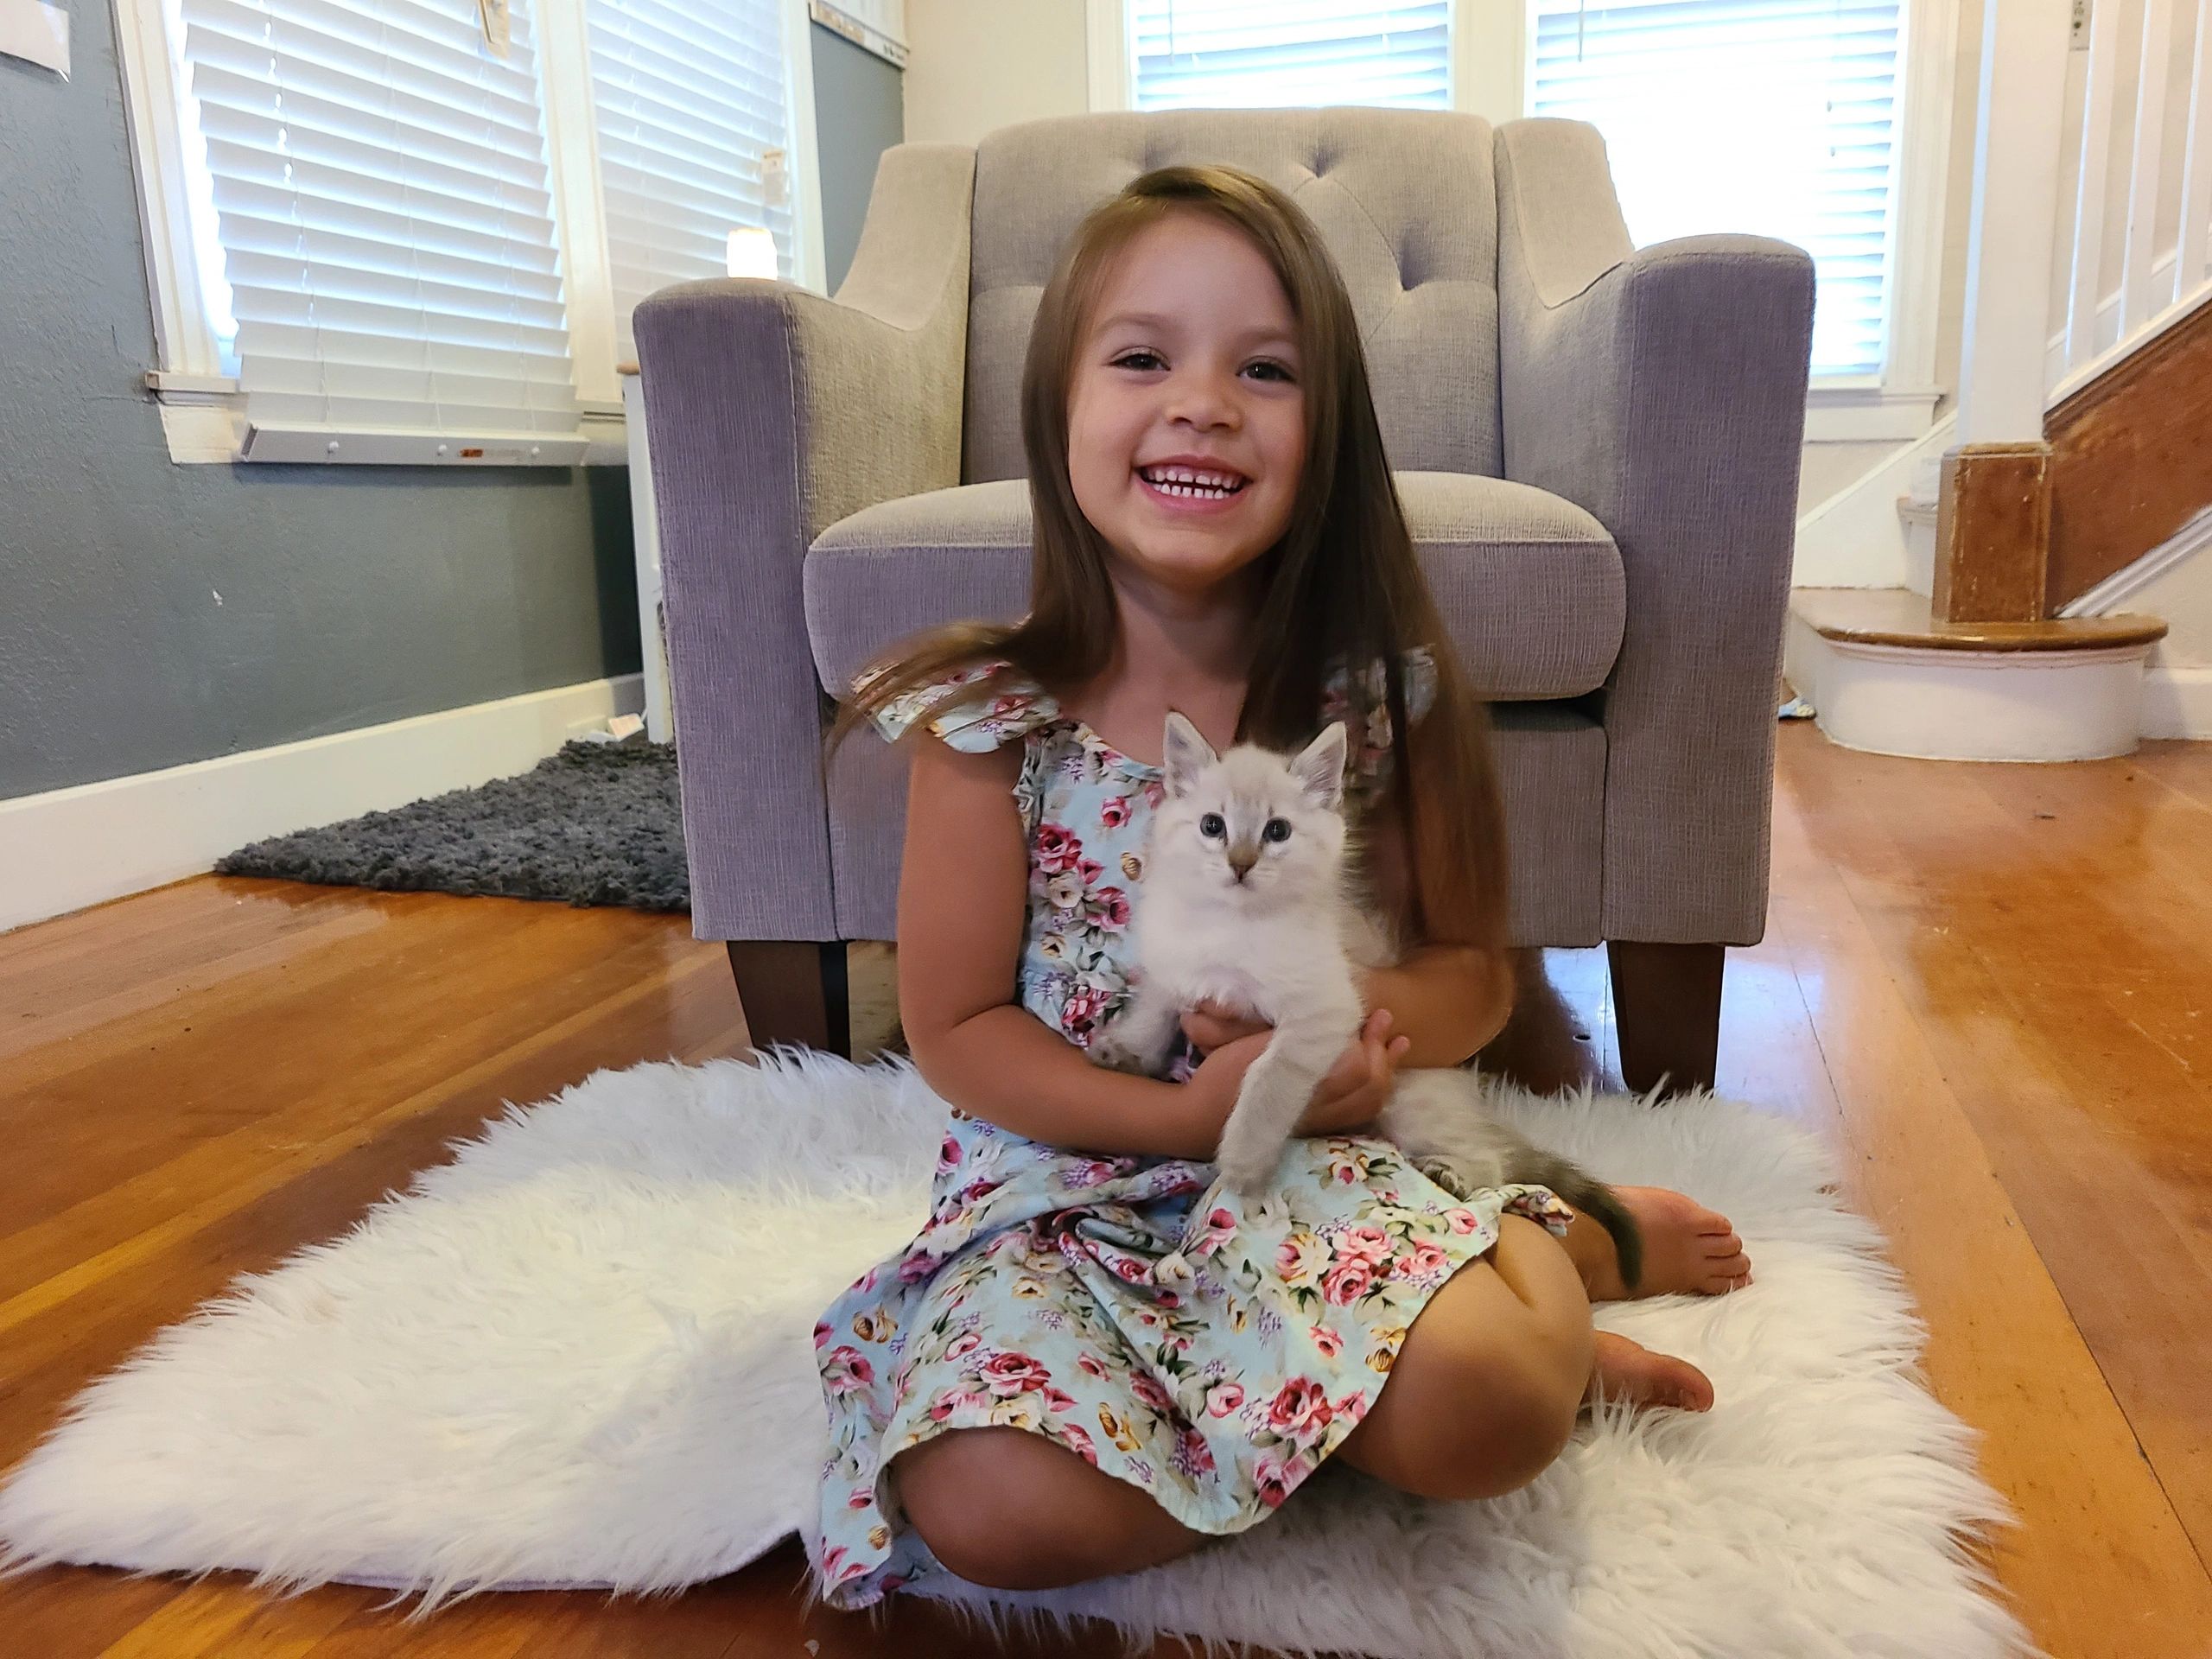 A girl sitting on a clean rug and hardwood floor with clean upholstery